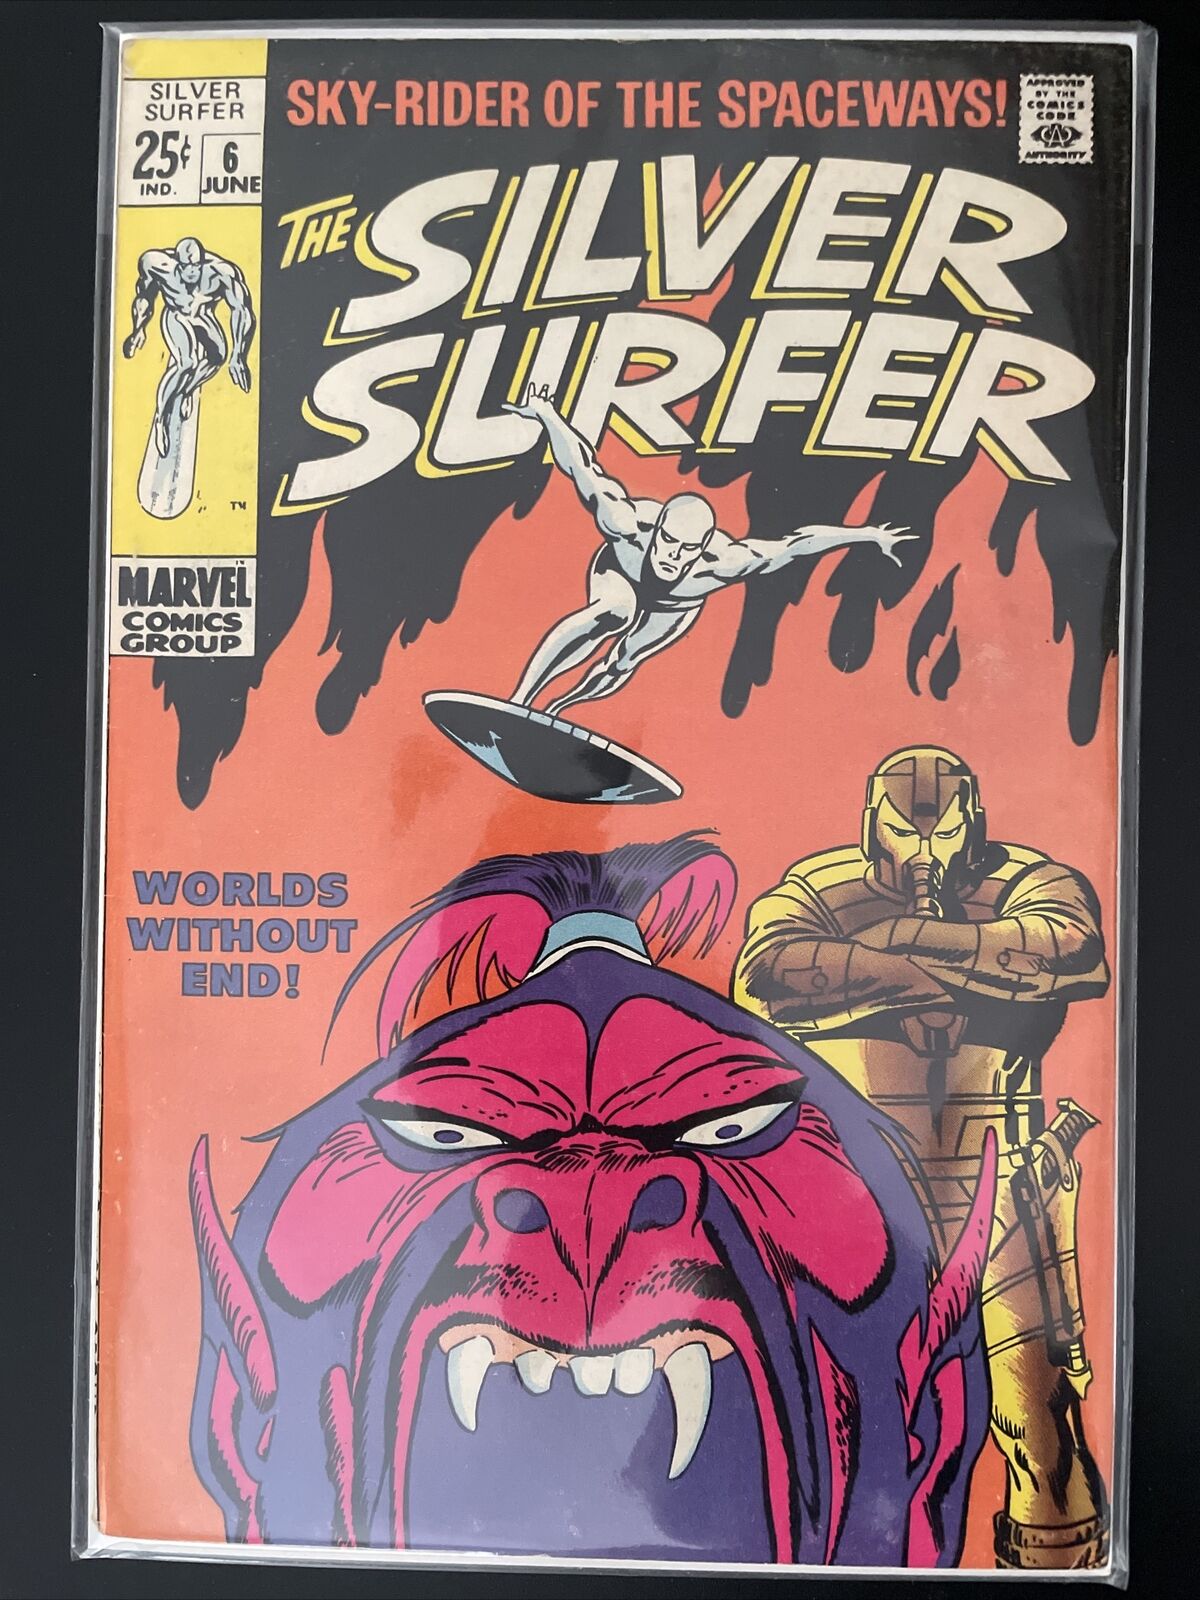 Silver Surfer #6 (Marvel) By Stan Lee & Syd Shores